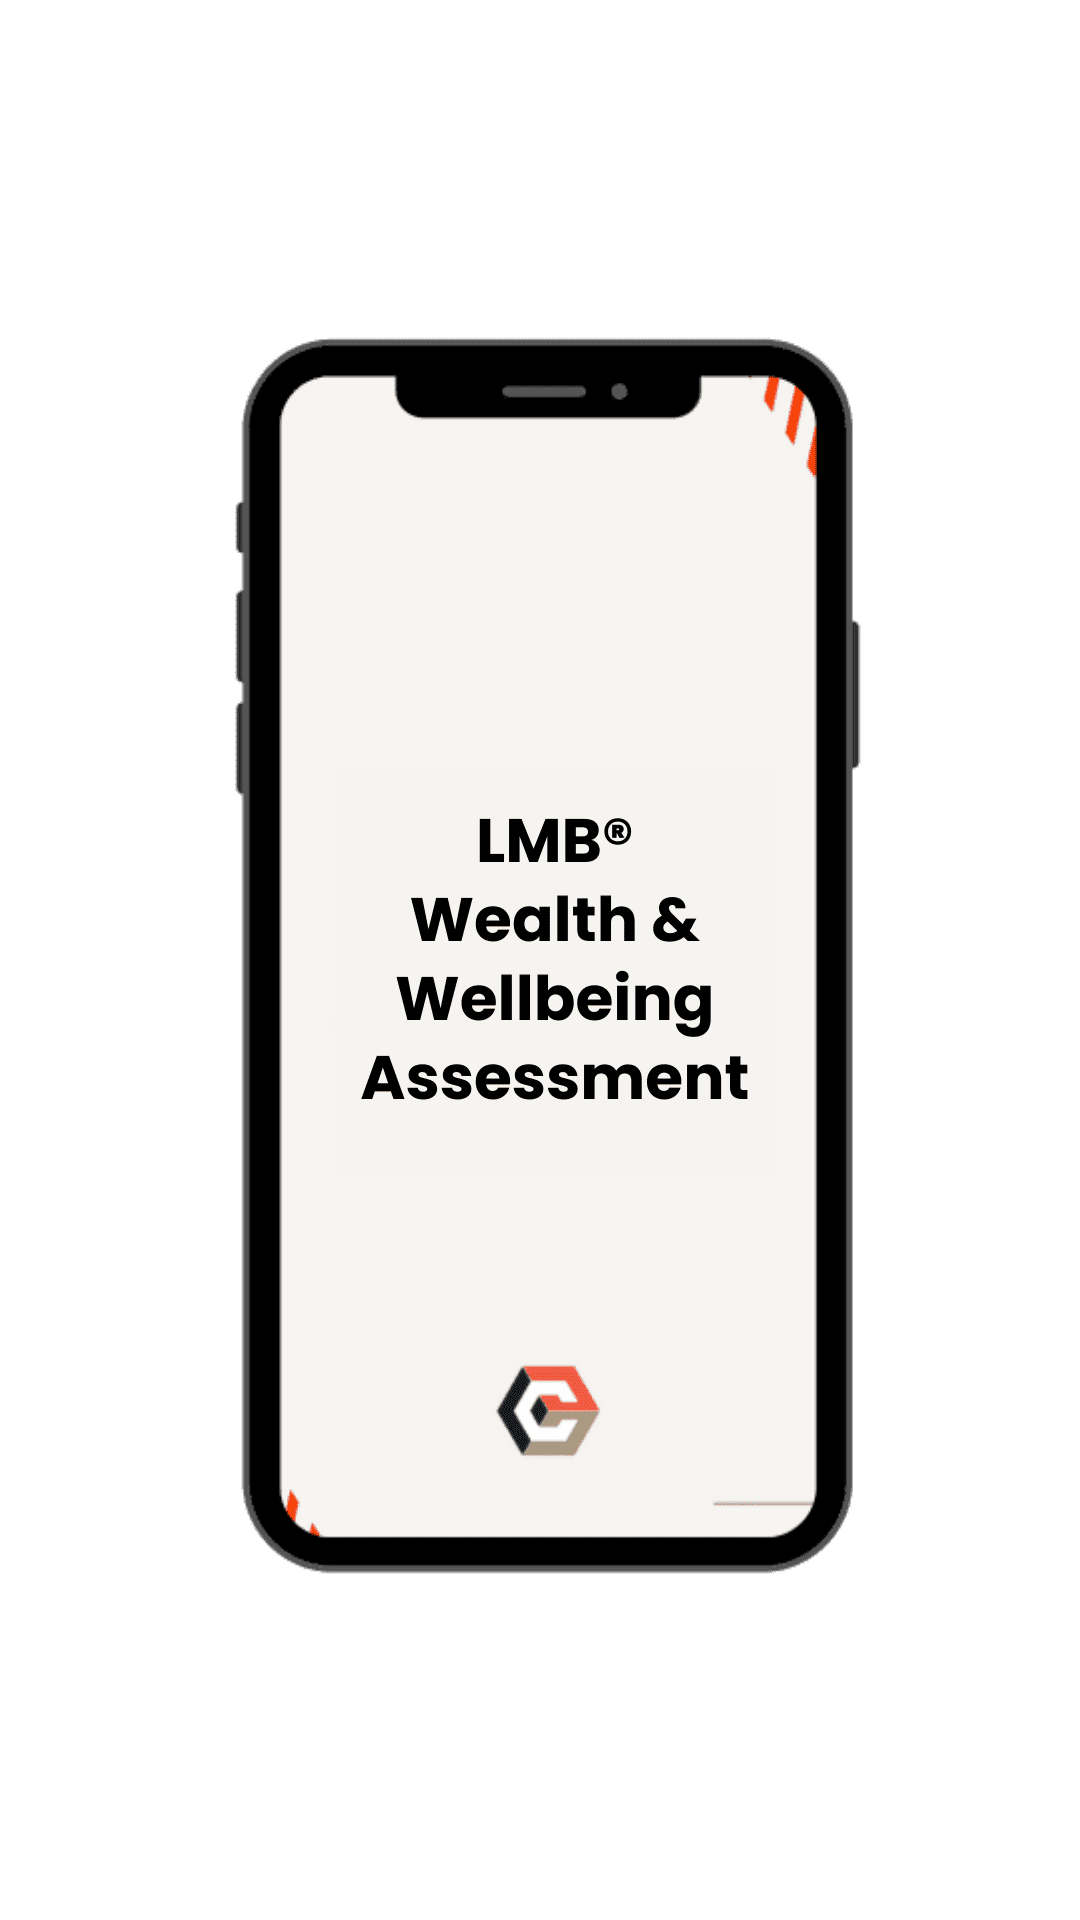 LMB® Wealth Wellbeing Assessment